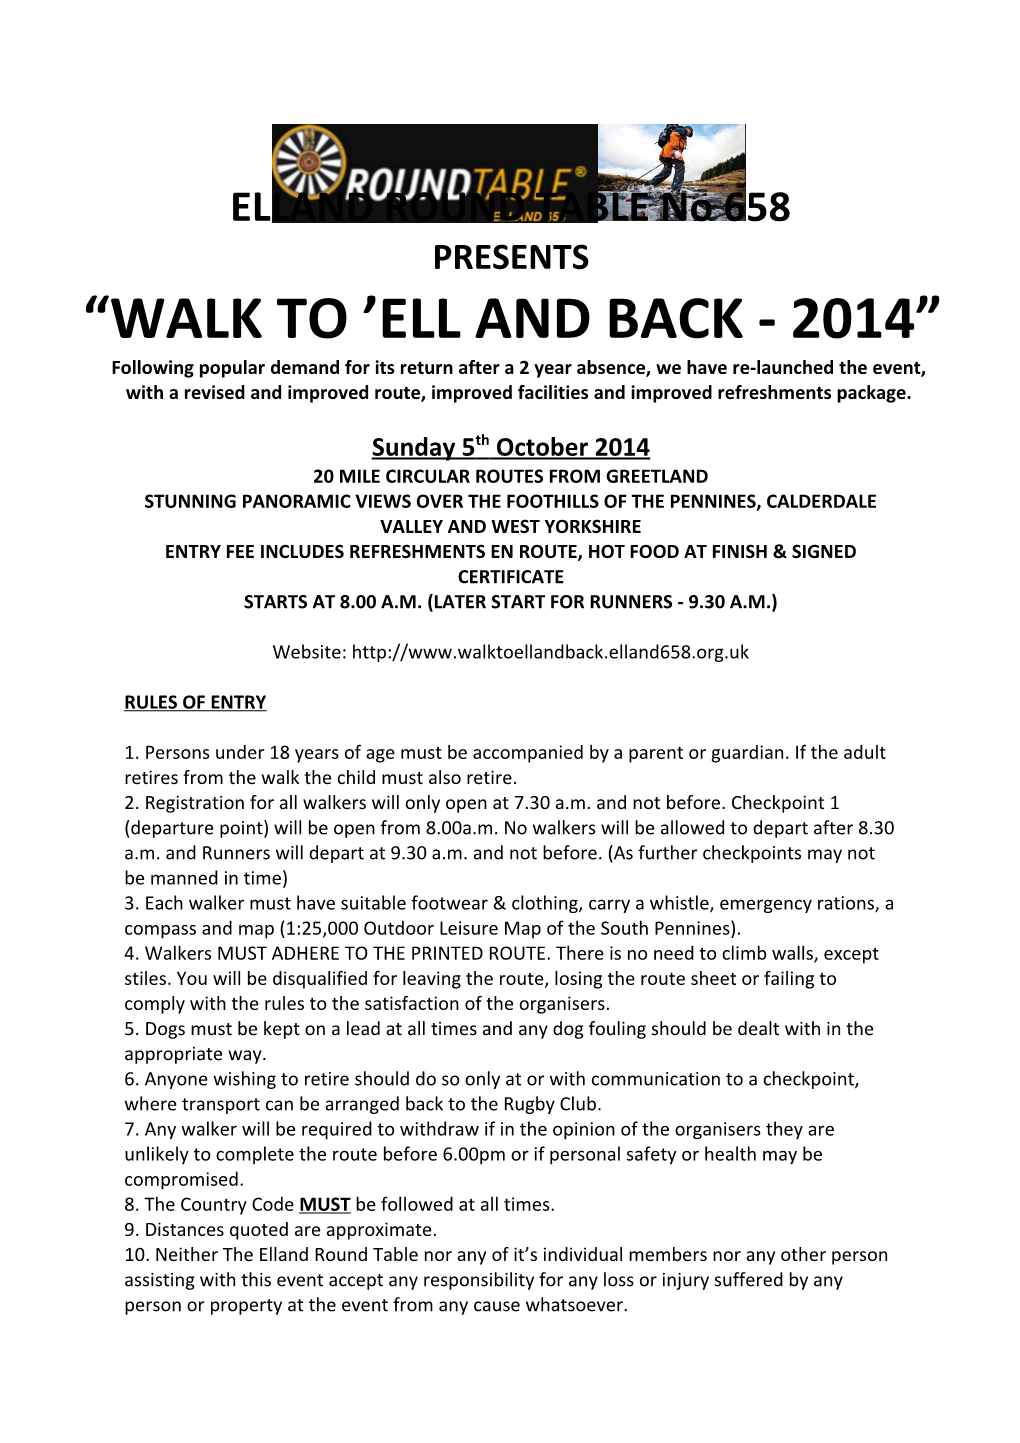 Walk to Ell and Back - 2014